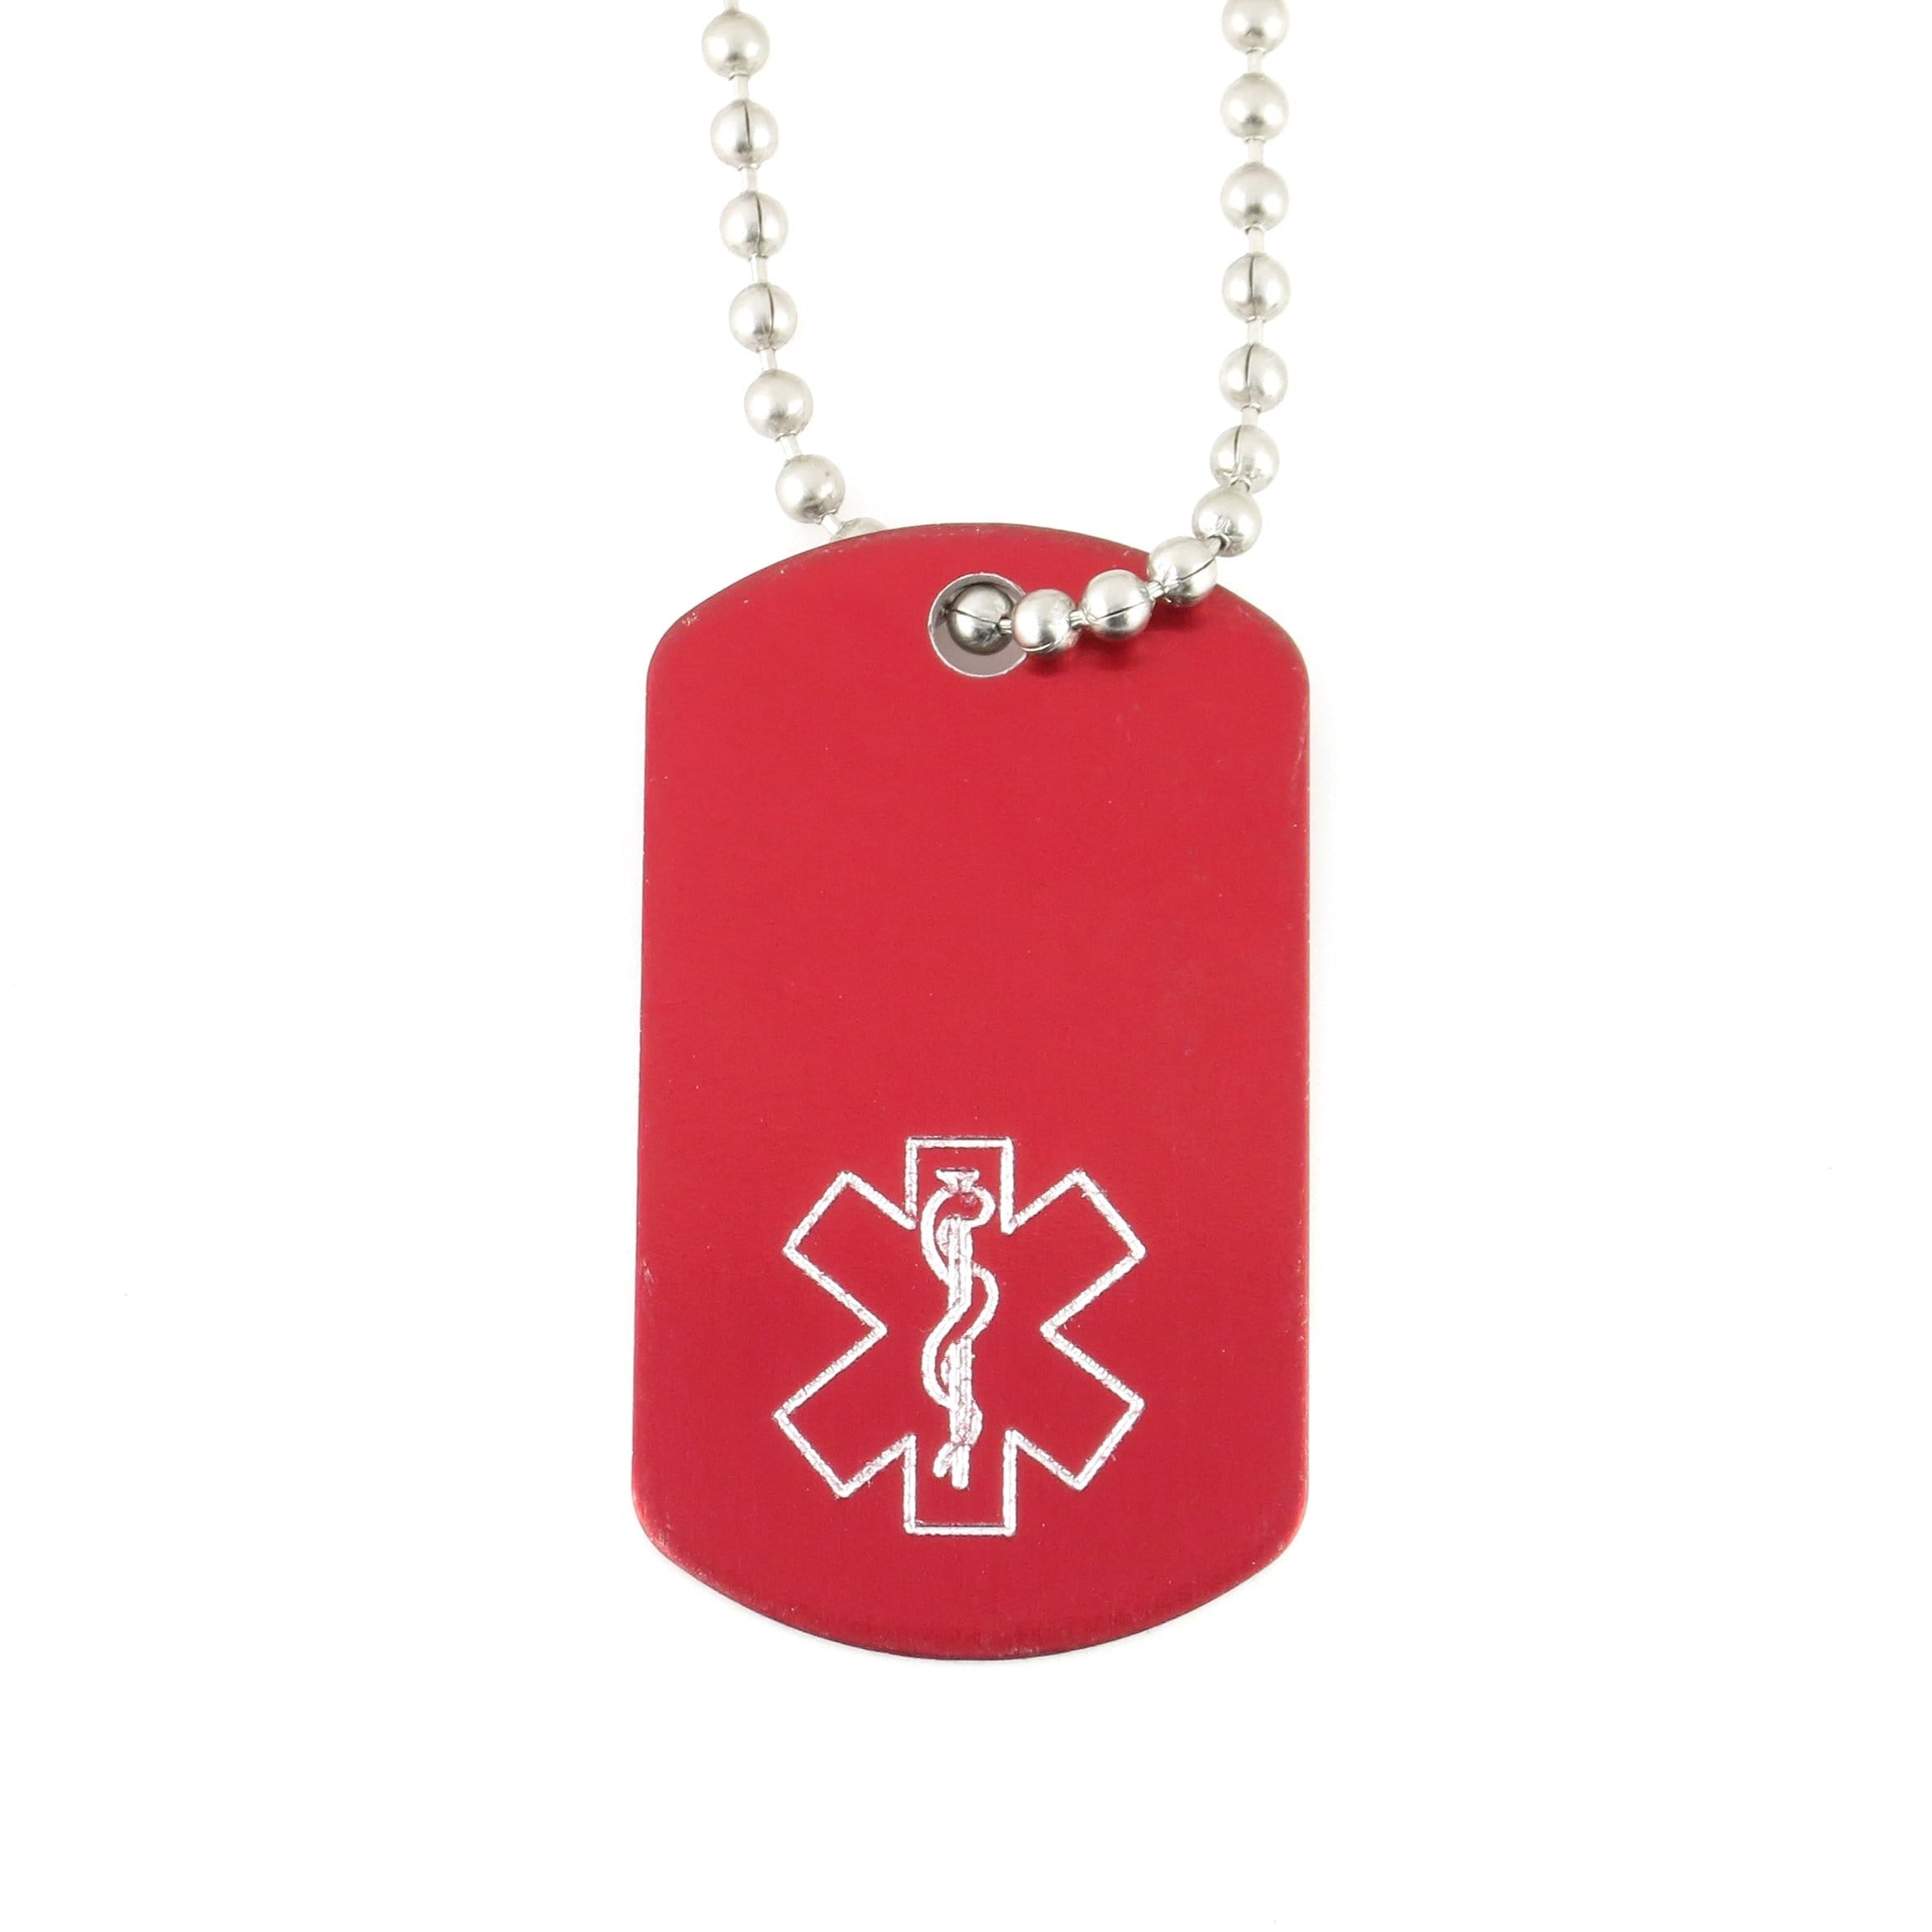 Buy Stainless Steel Dog Tag Red